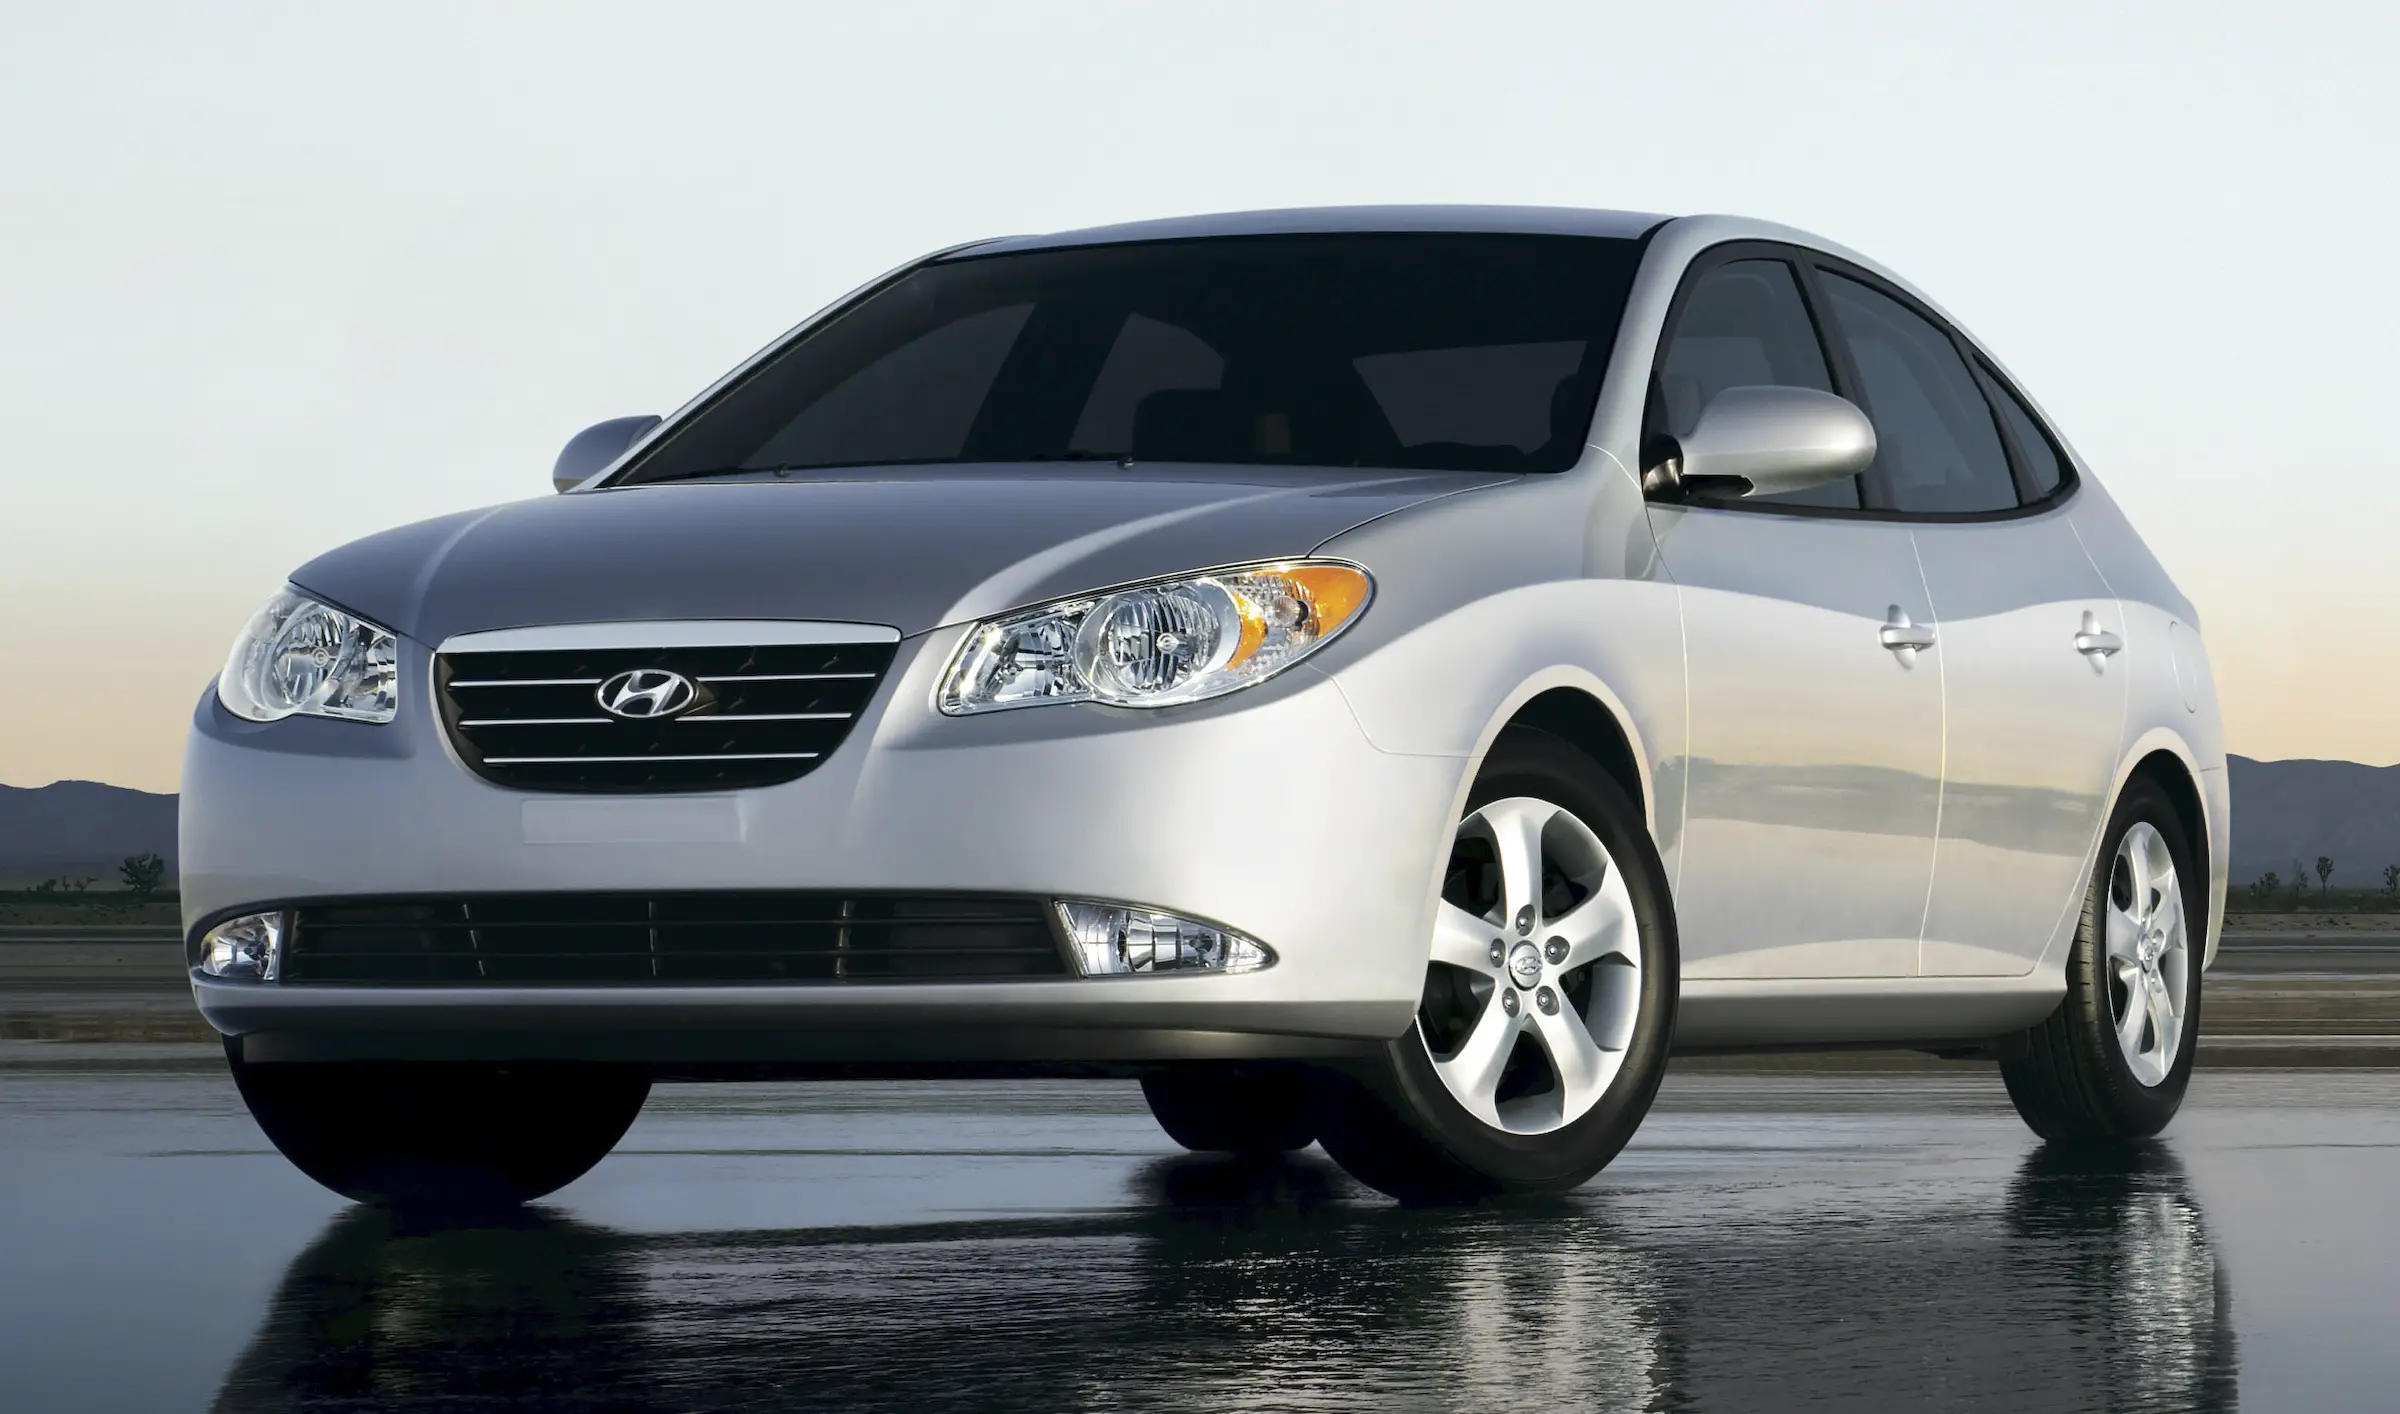 2009 Hyundai Elantra Named "Best Compact For The Money" By U.S. News